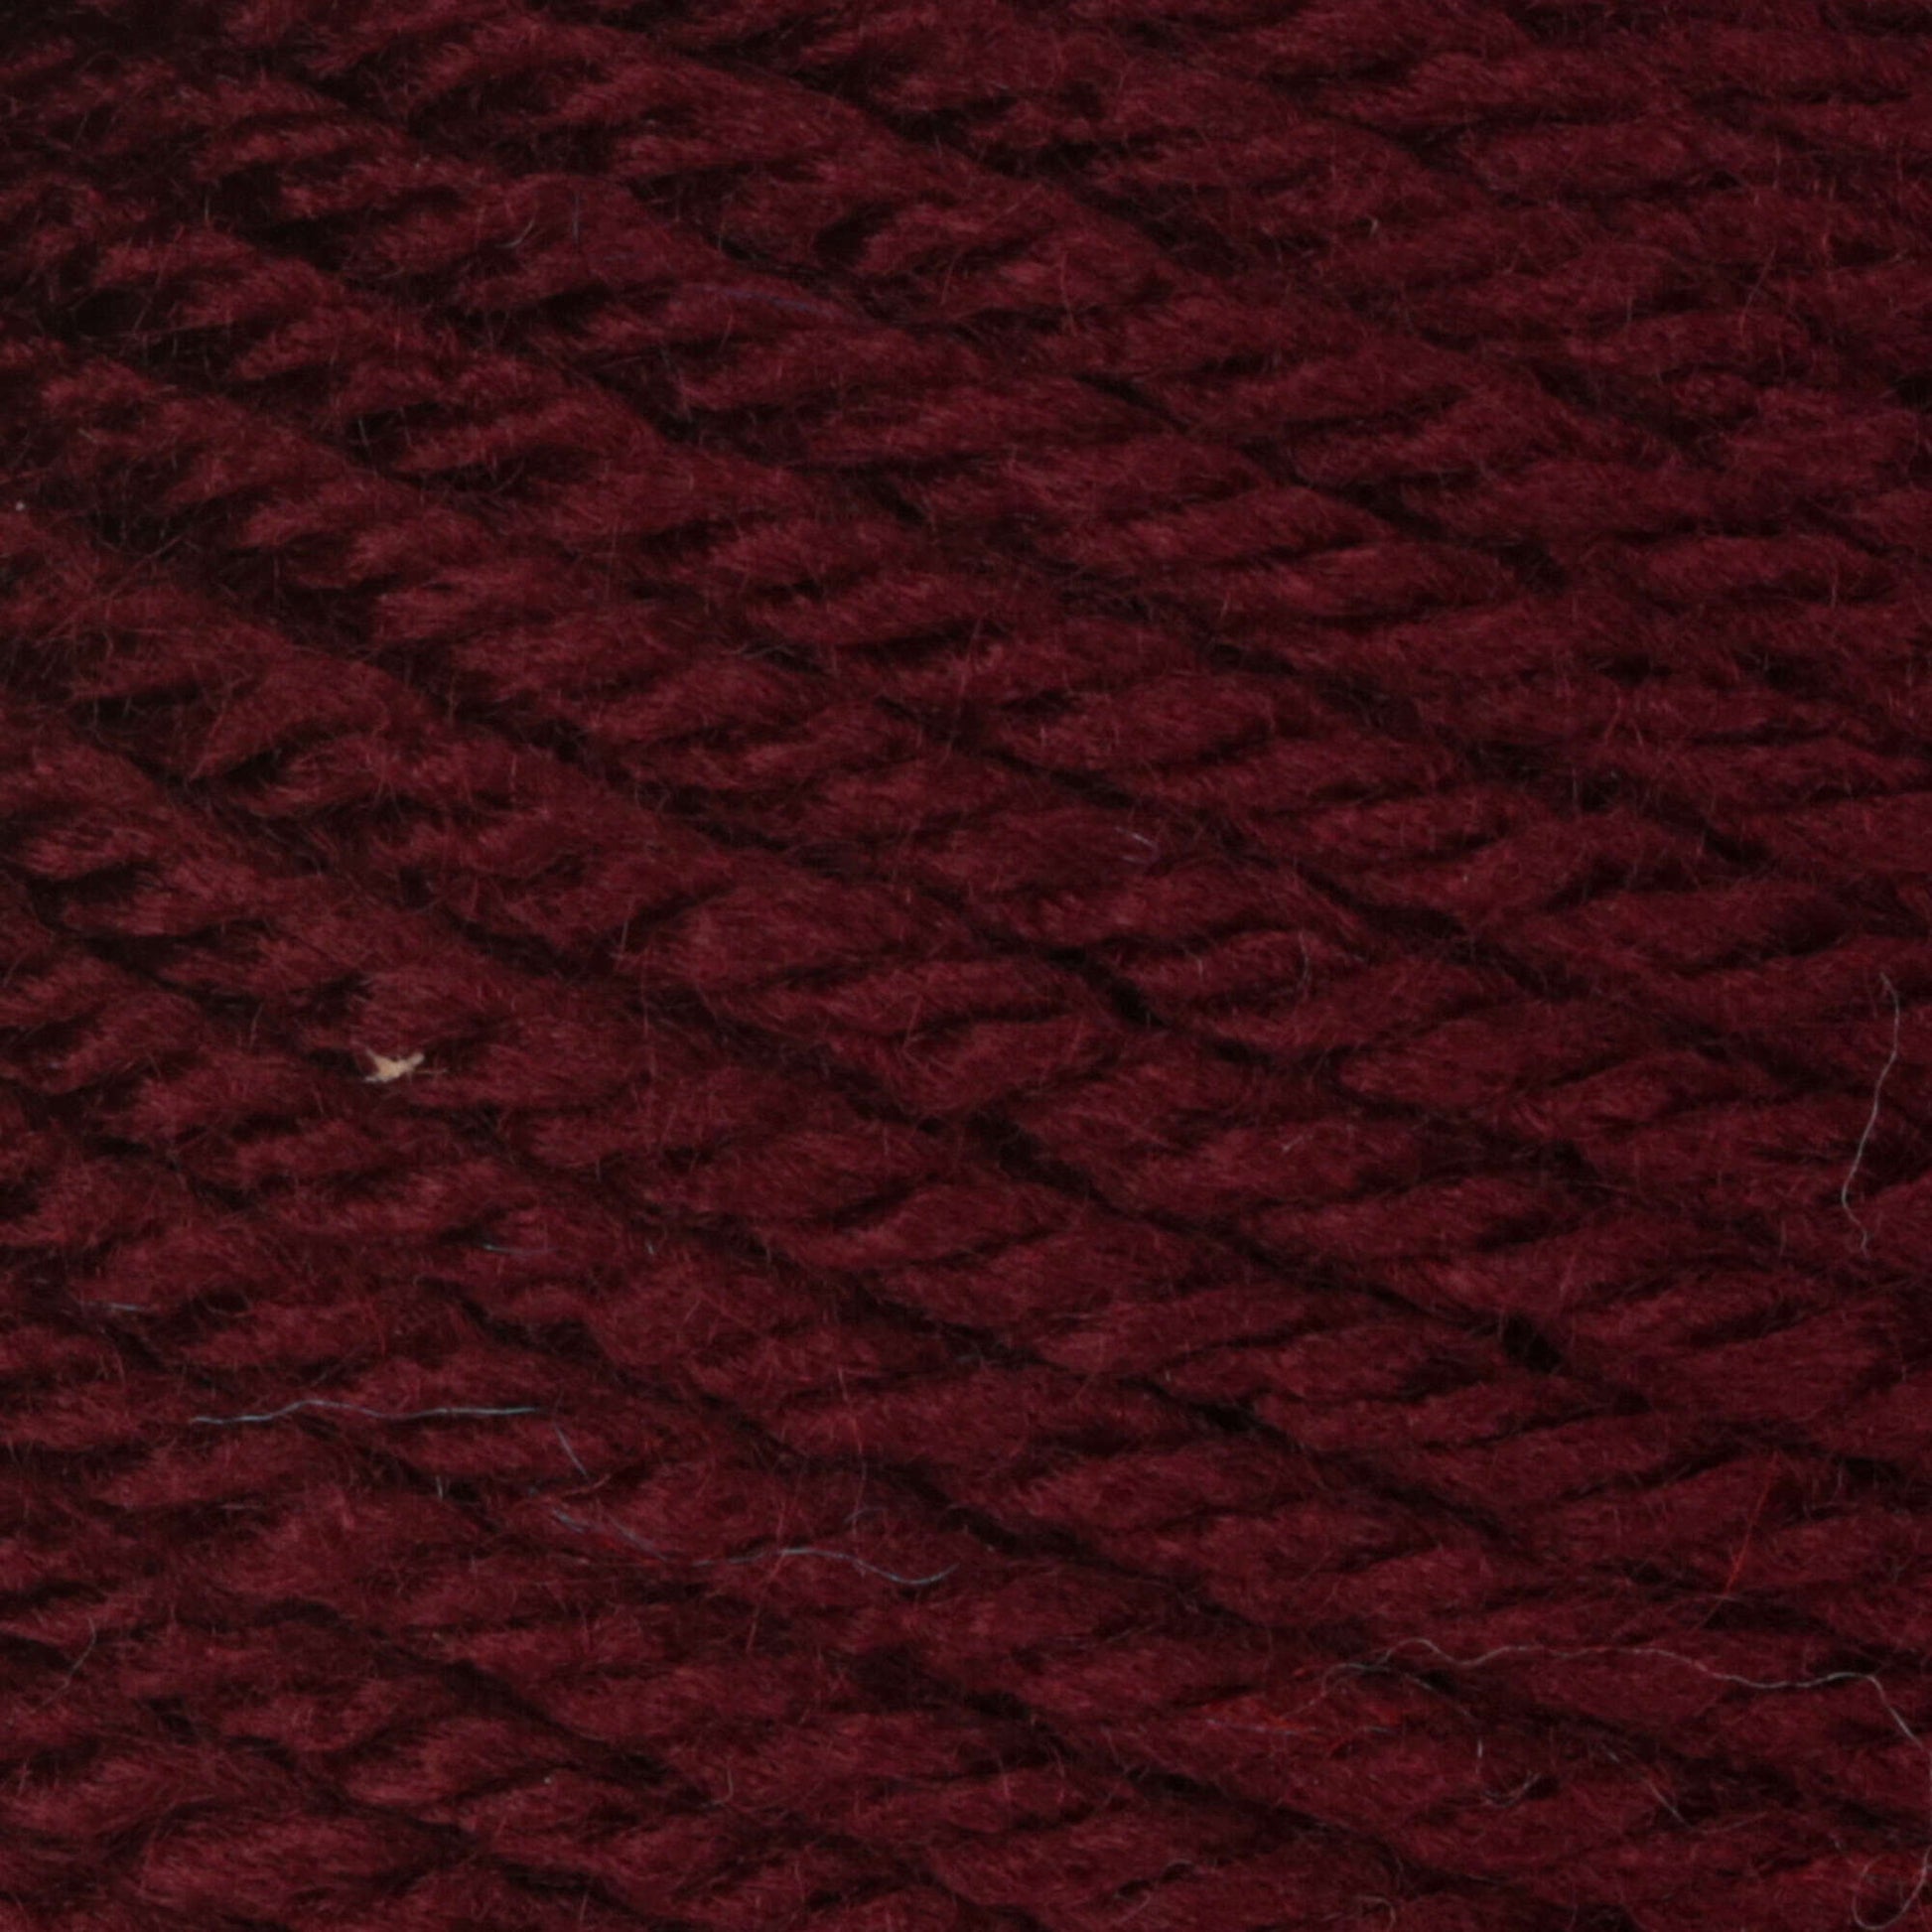 Patons® Canadiana - Burgundy (detail)